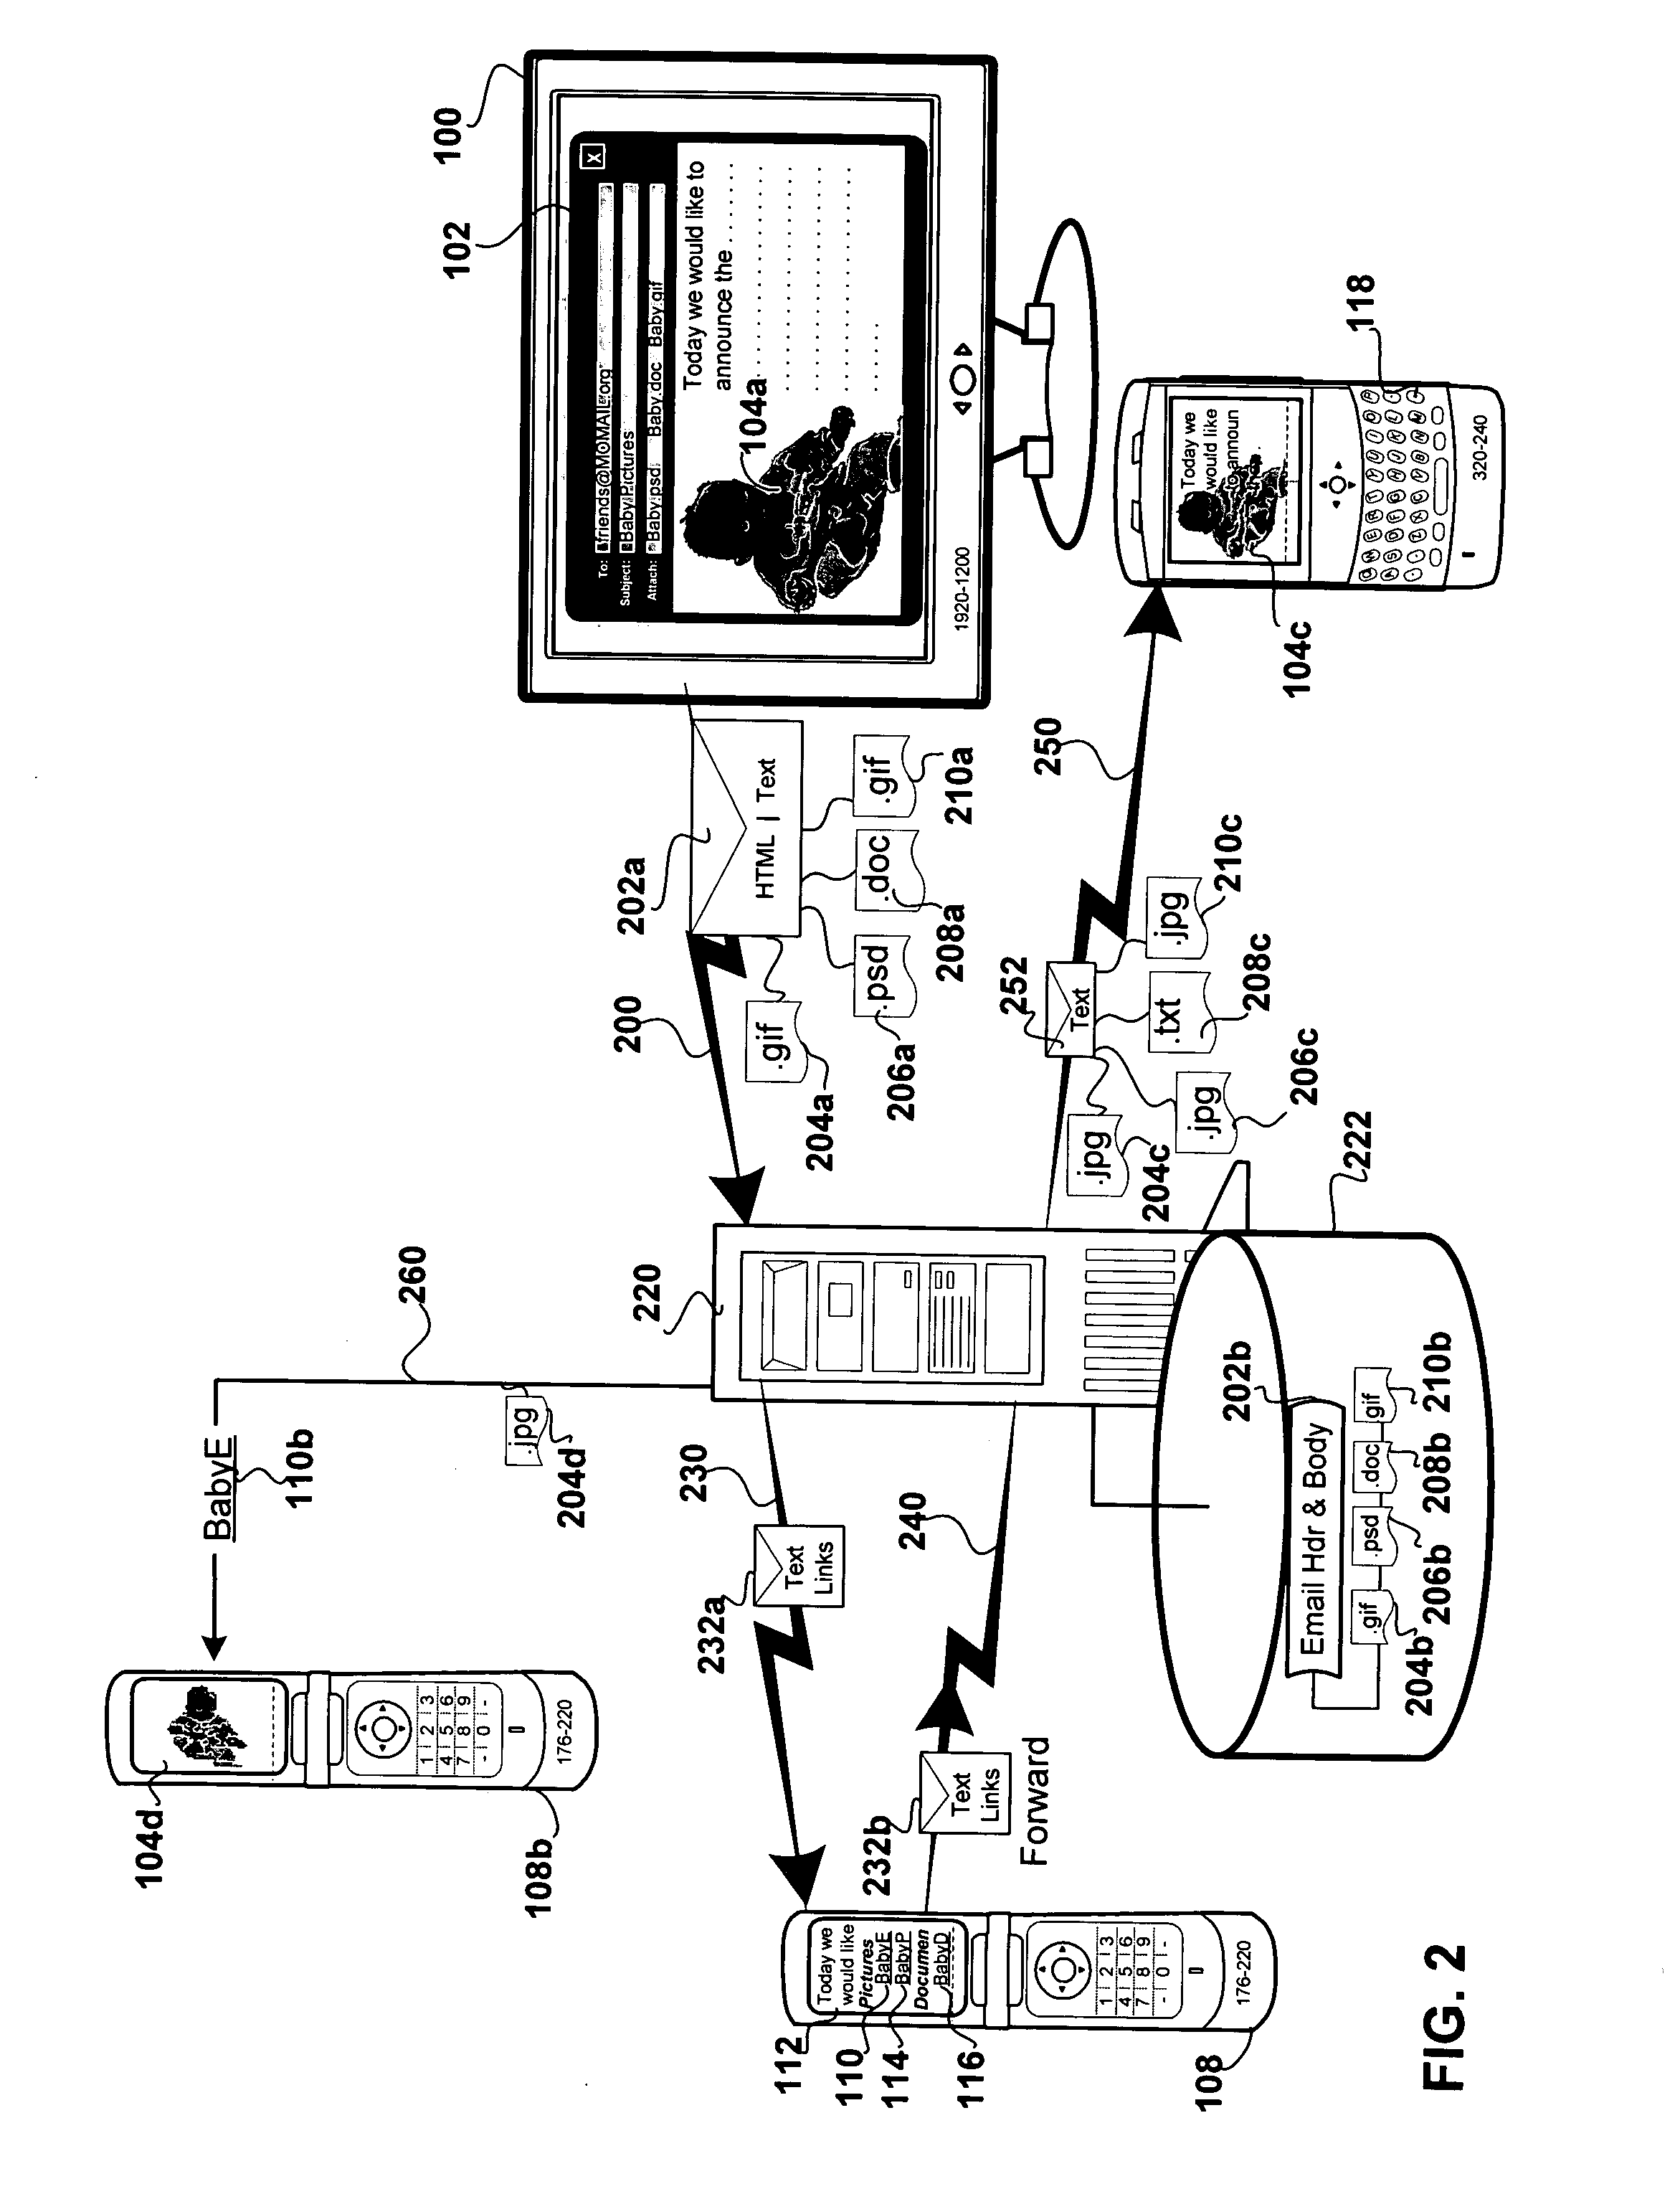 Method and apparatus for an email gateway